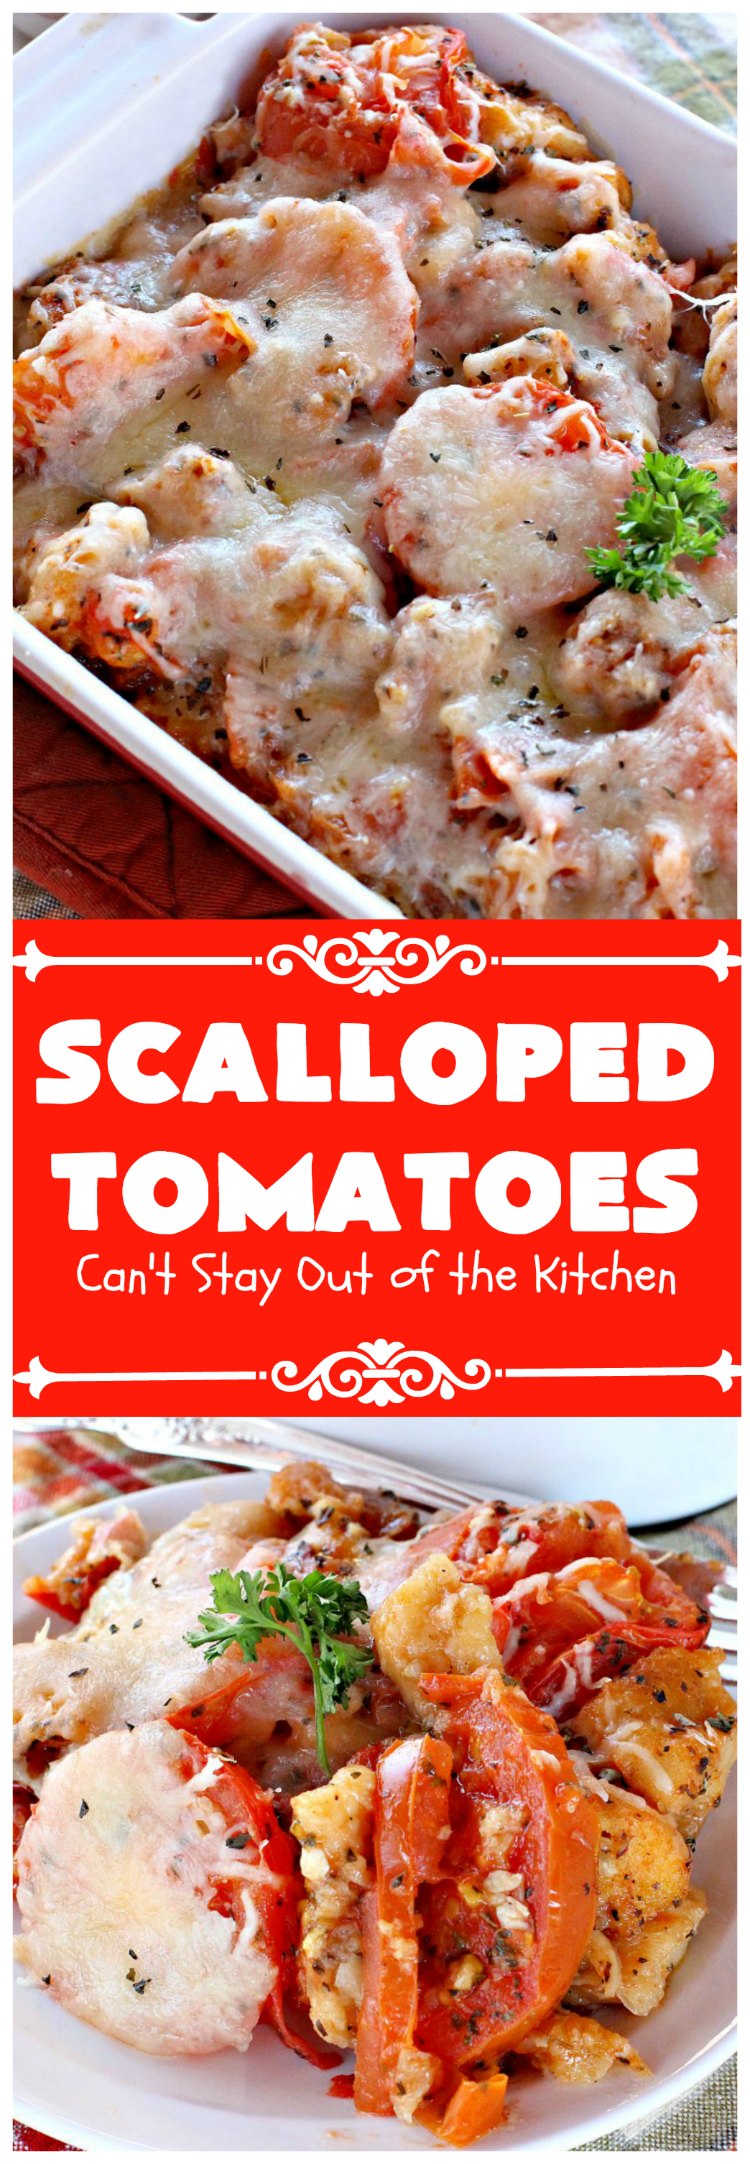 Scalloped Tomatoes | Can't Stay Out of the Kitchen